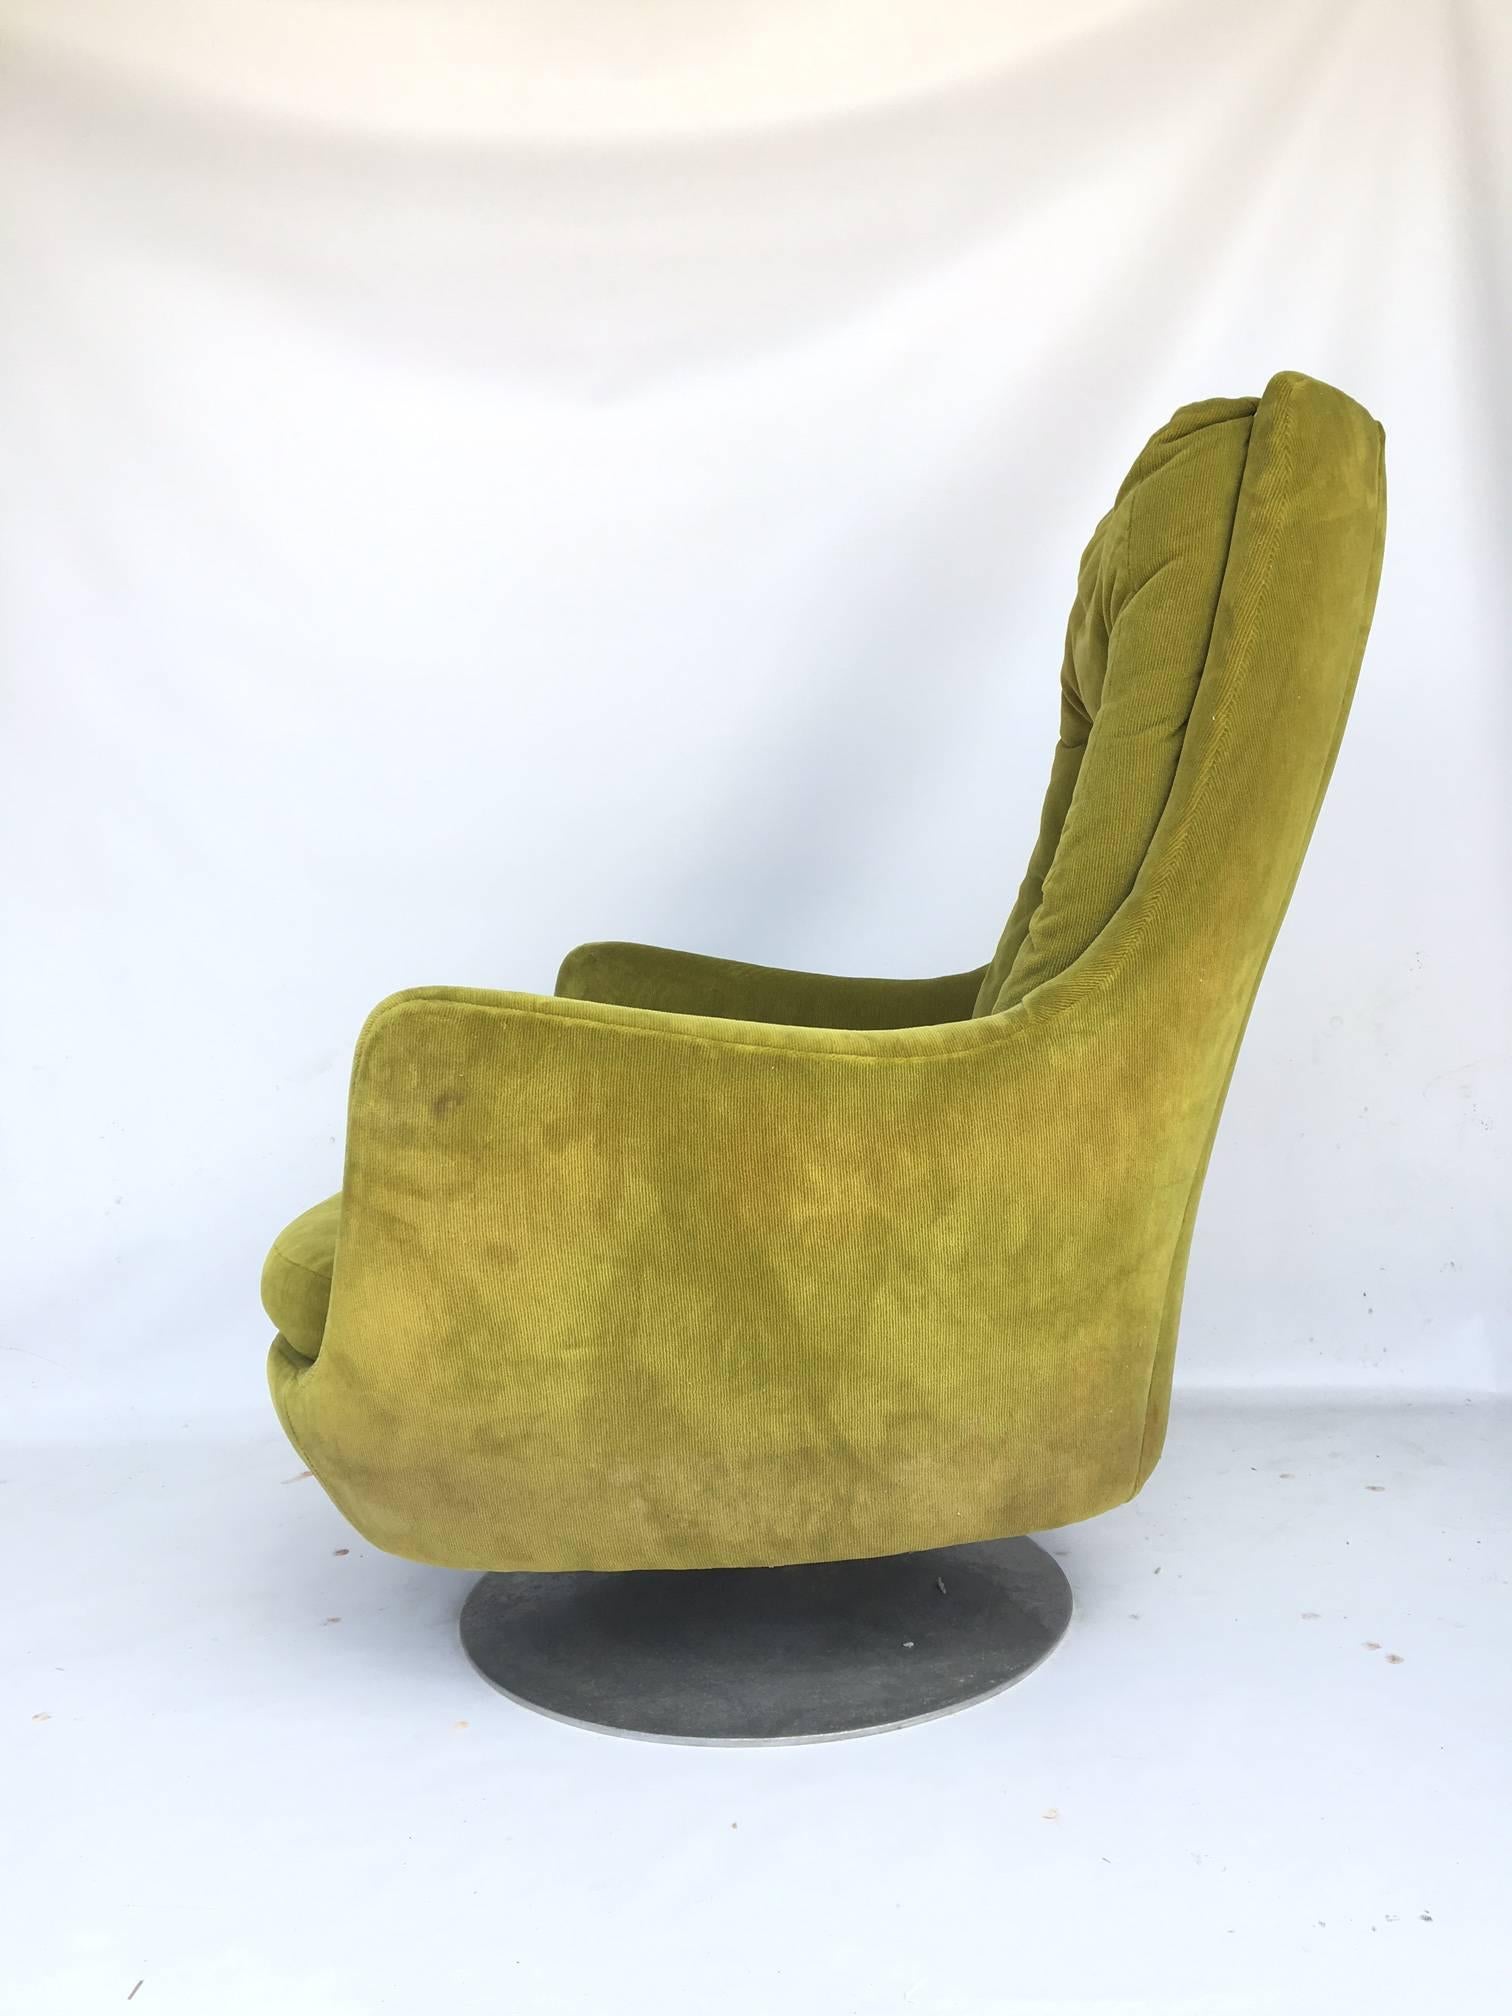 Stunning midcentury upholstered lounge chair by Milo Baughman. Sits on a swivel base that rotates 360 degrees on chrome base. Plush green fabric is in beautiful condition for it's age.  Some very slight signs of age appropriate wear.
